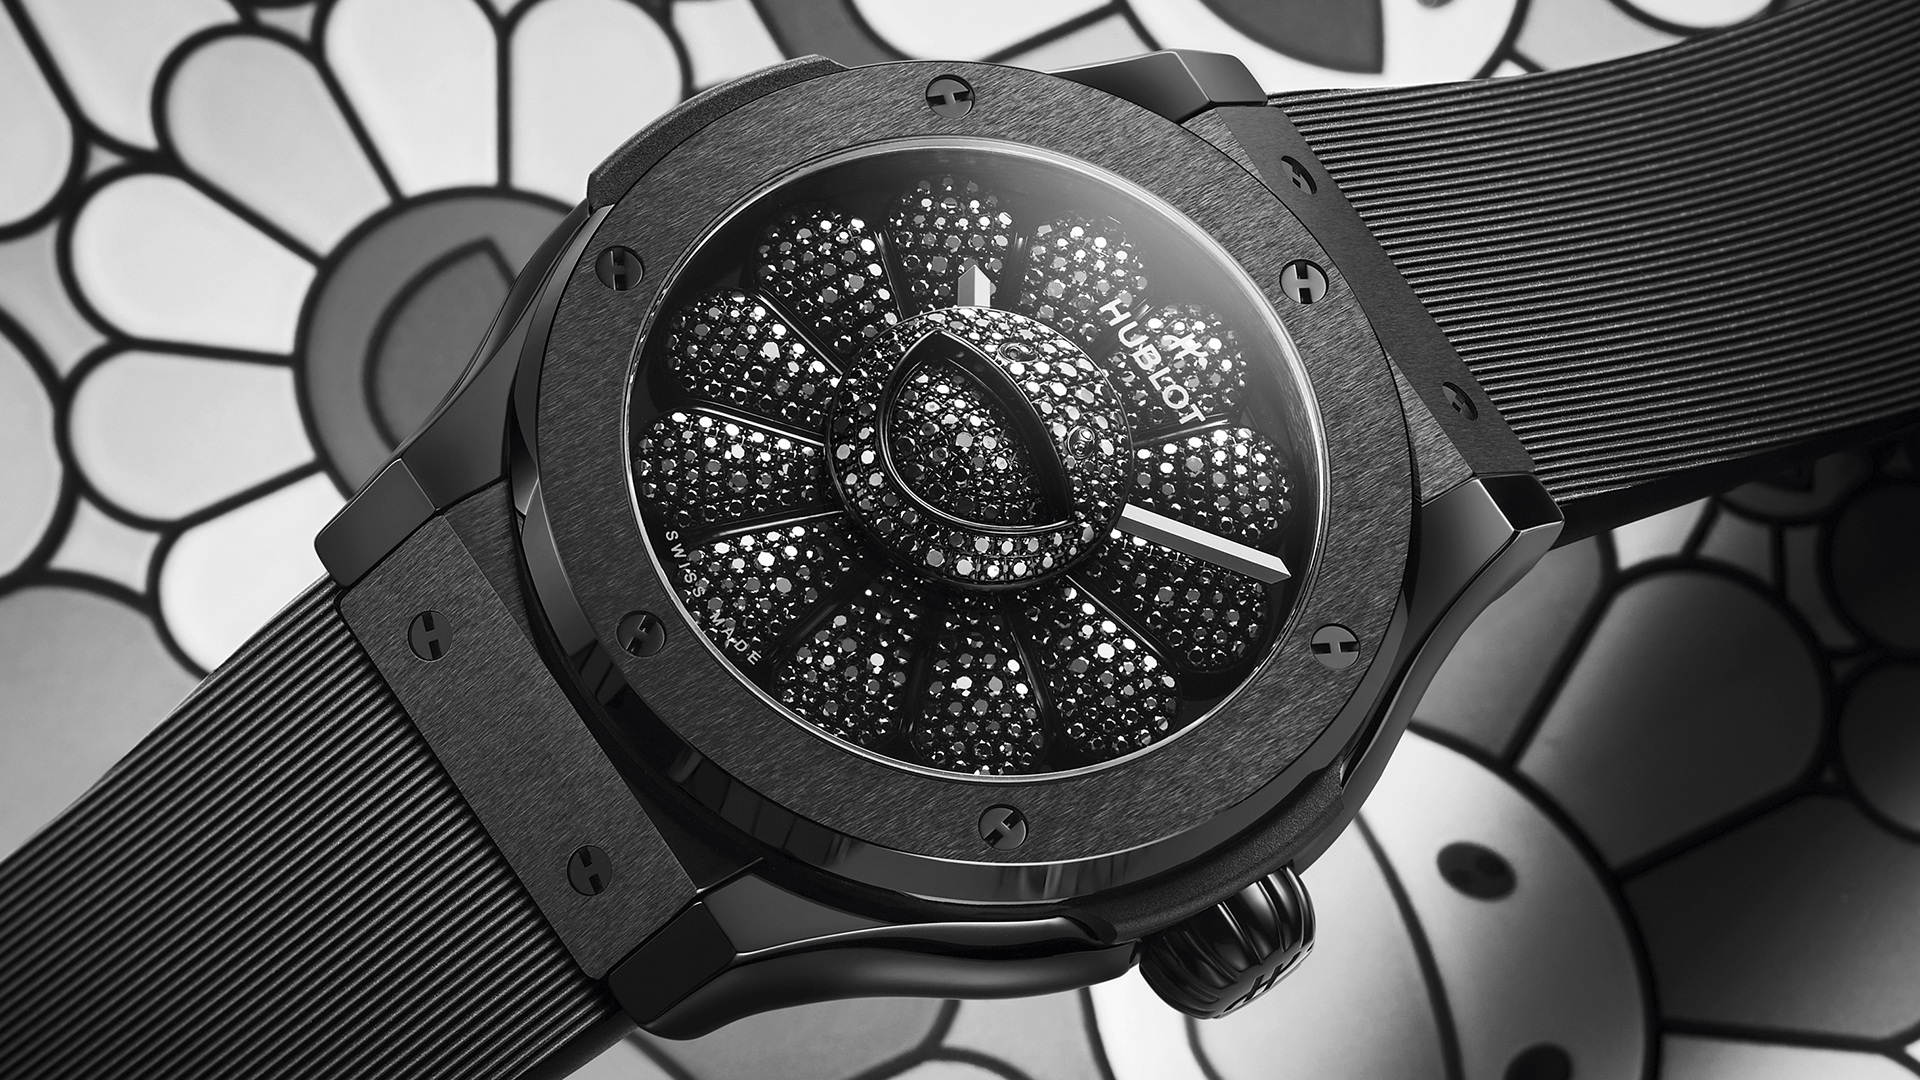 Takashi Murakami's iconic flower gets re-imagined for an all-black Hublot  watch